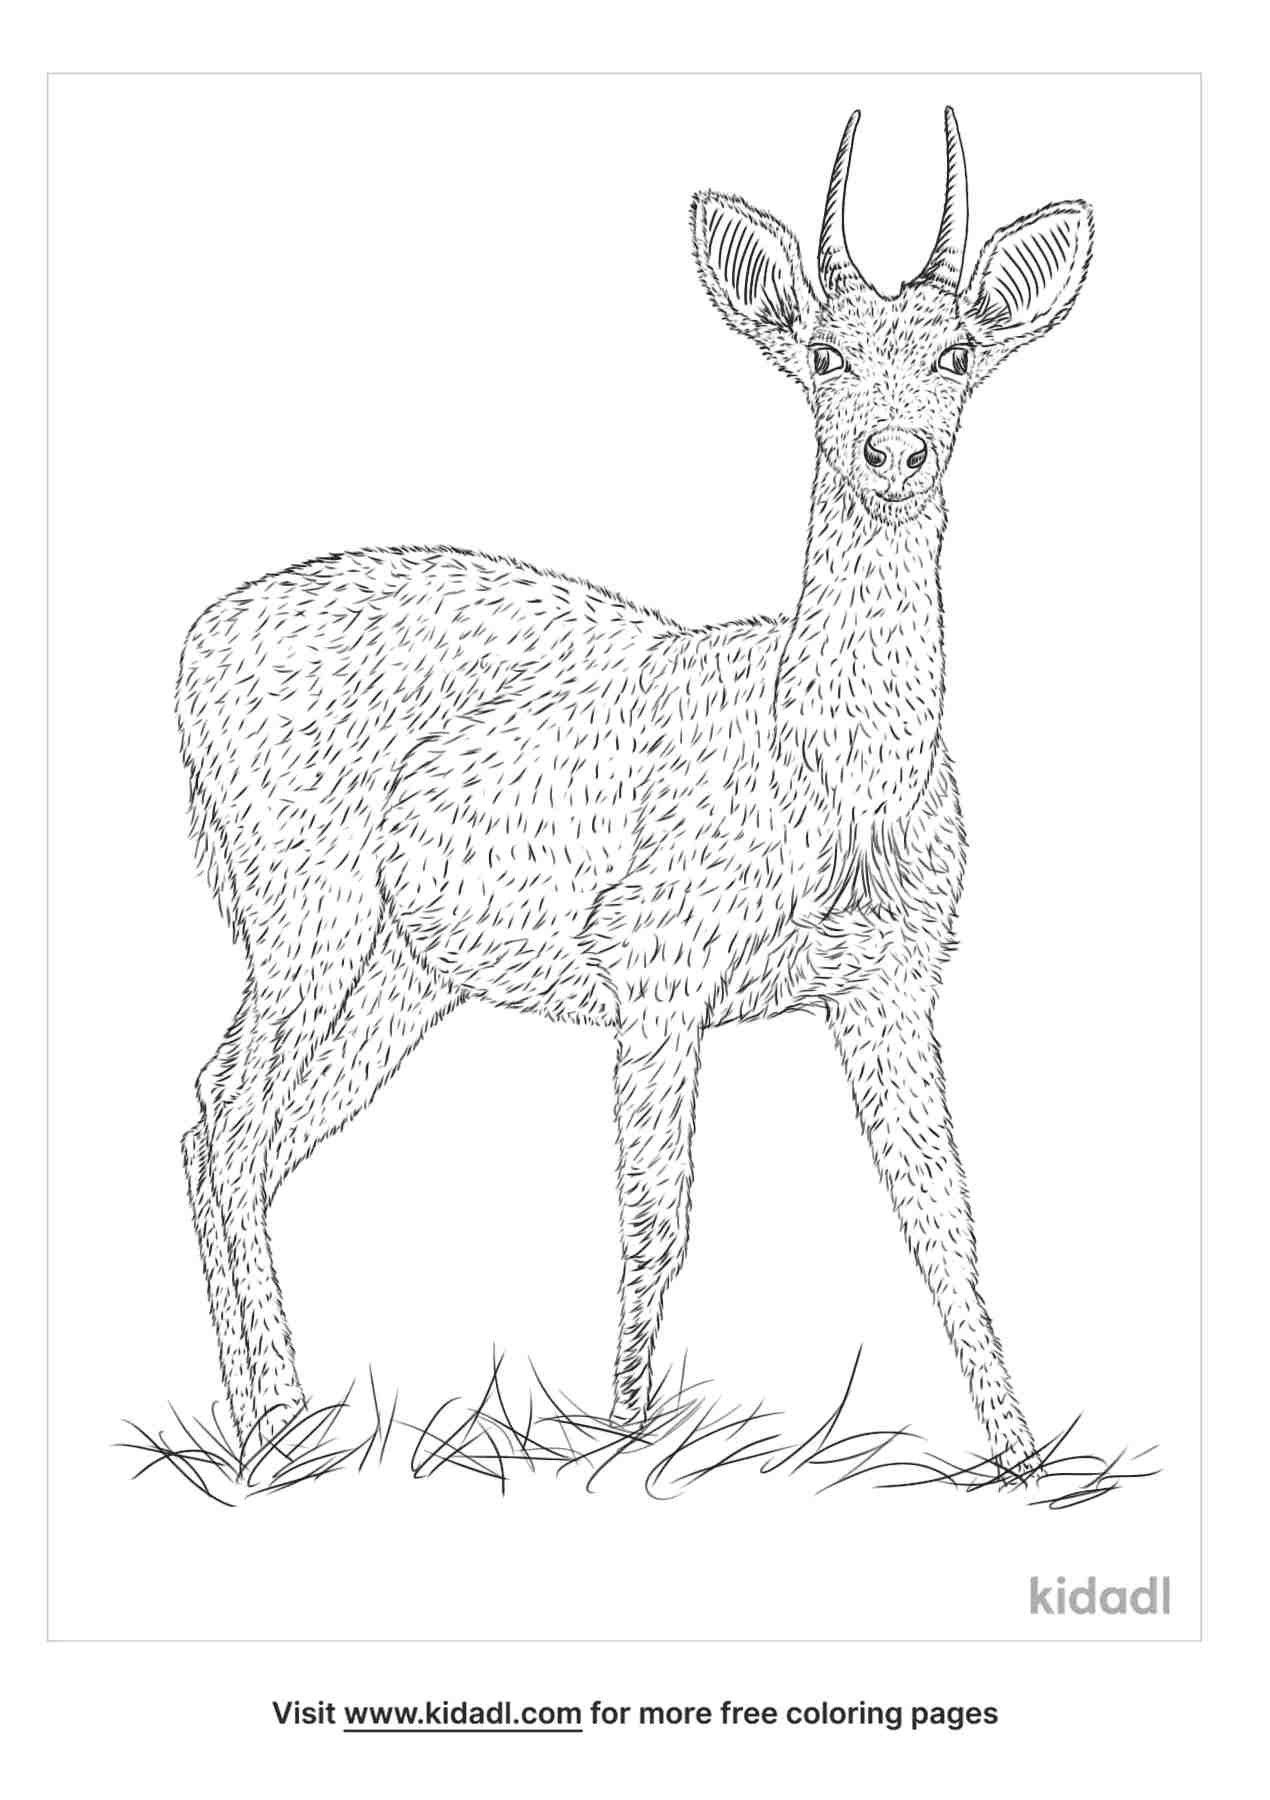 coloring page containing bohor reedbuck